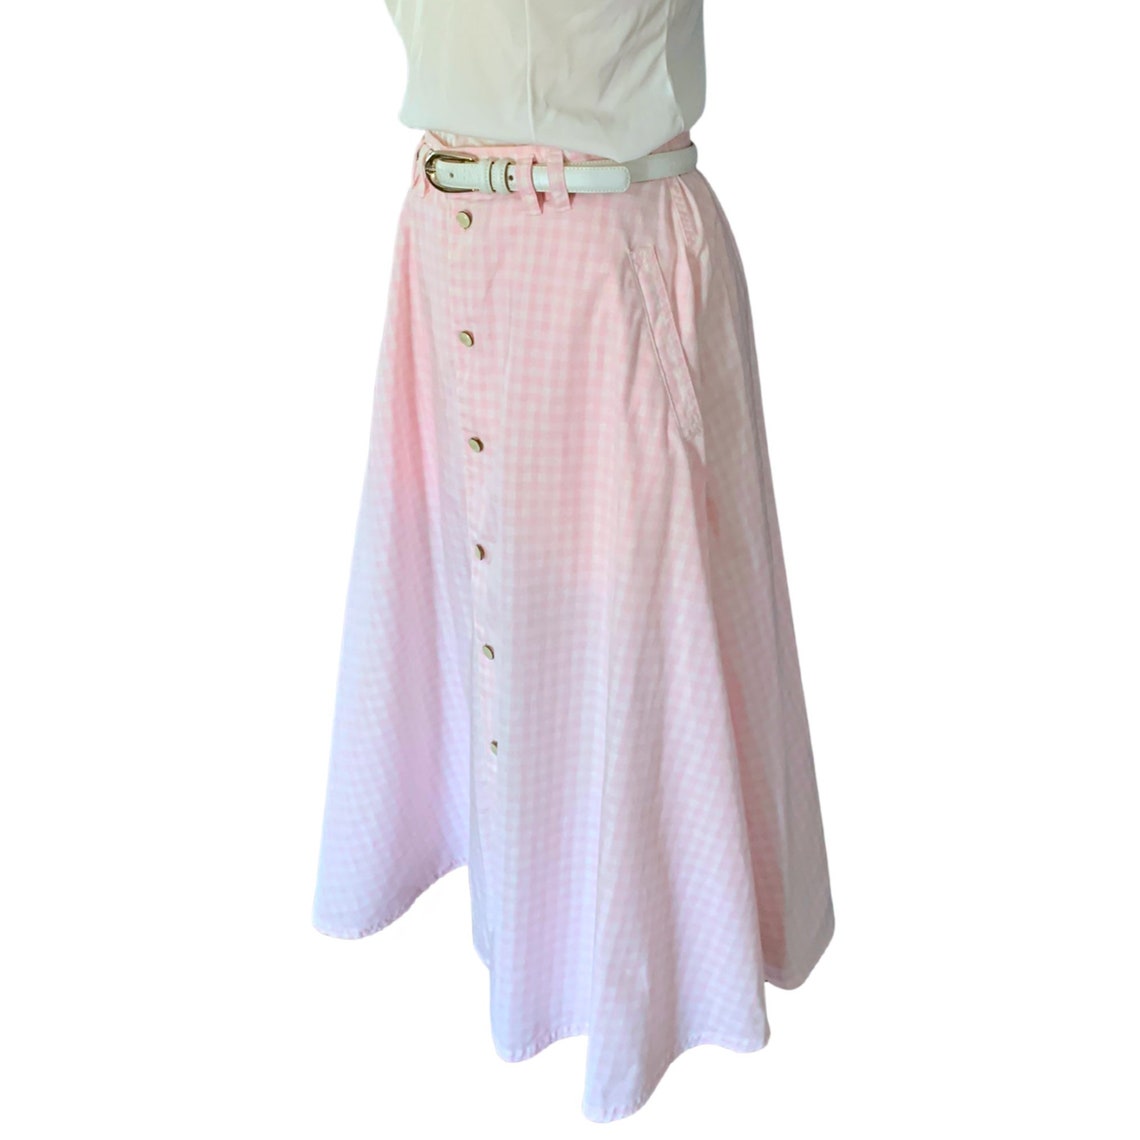 Vintage 90s Pink and White Checkered Skirt Pleated Skirt | Etsy